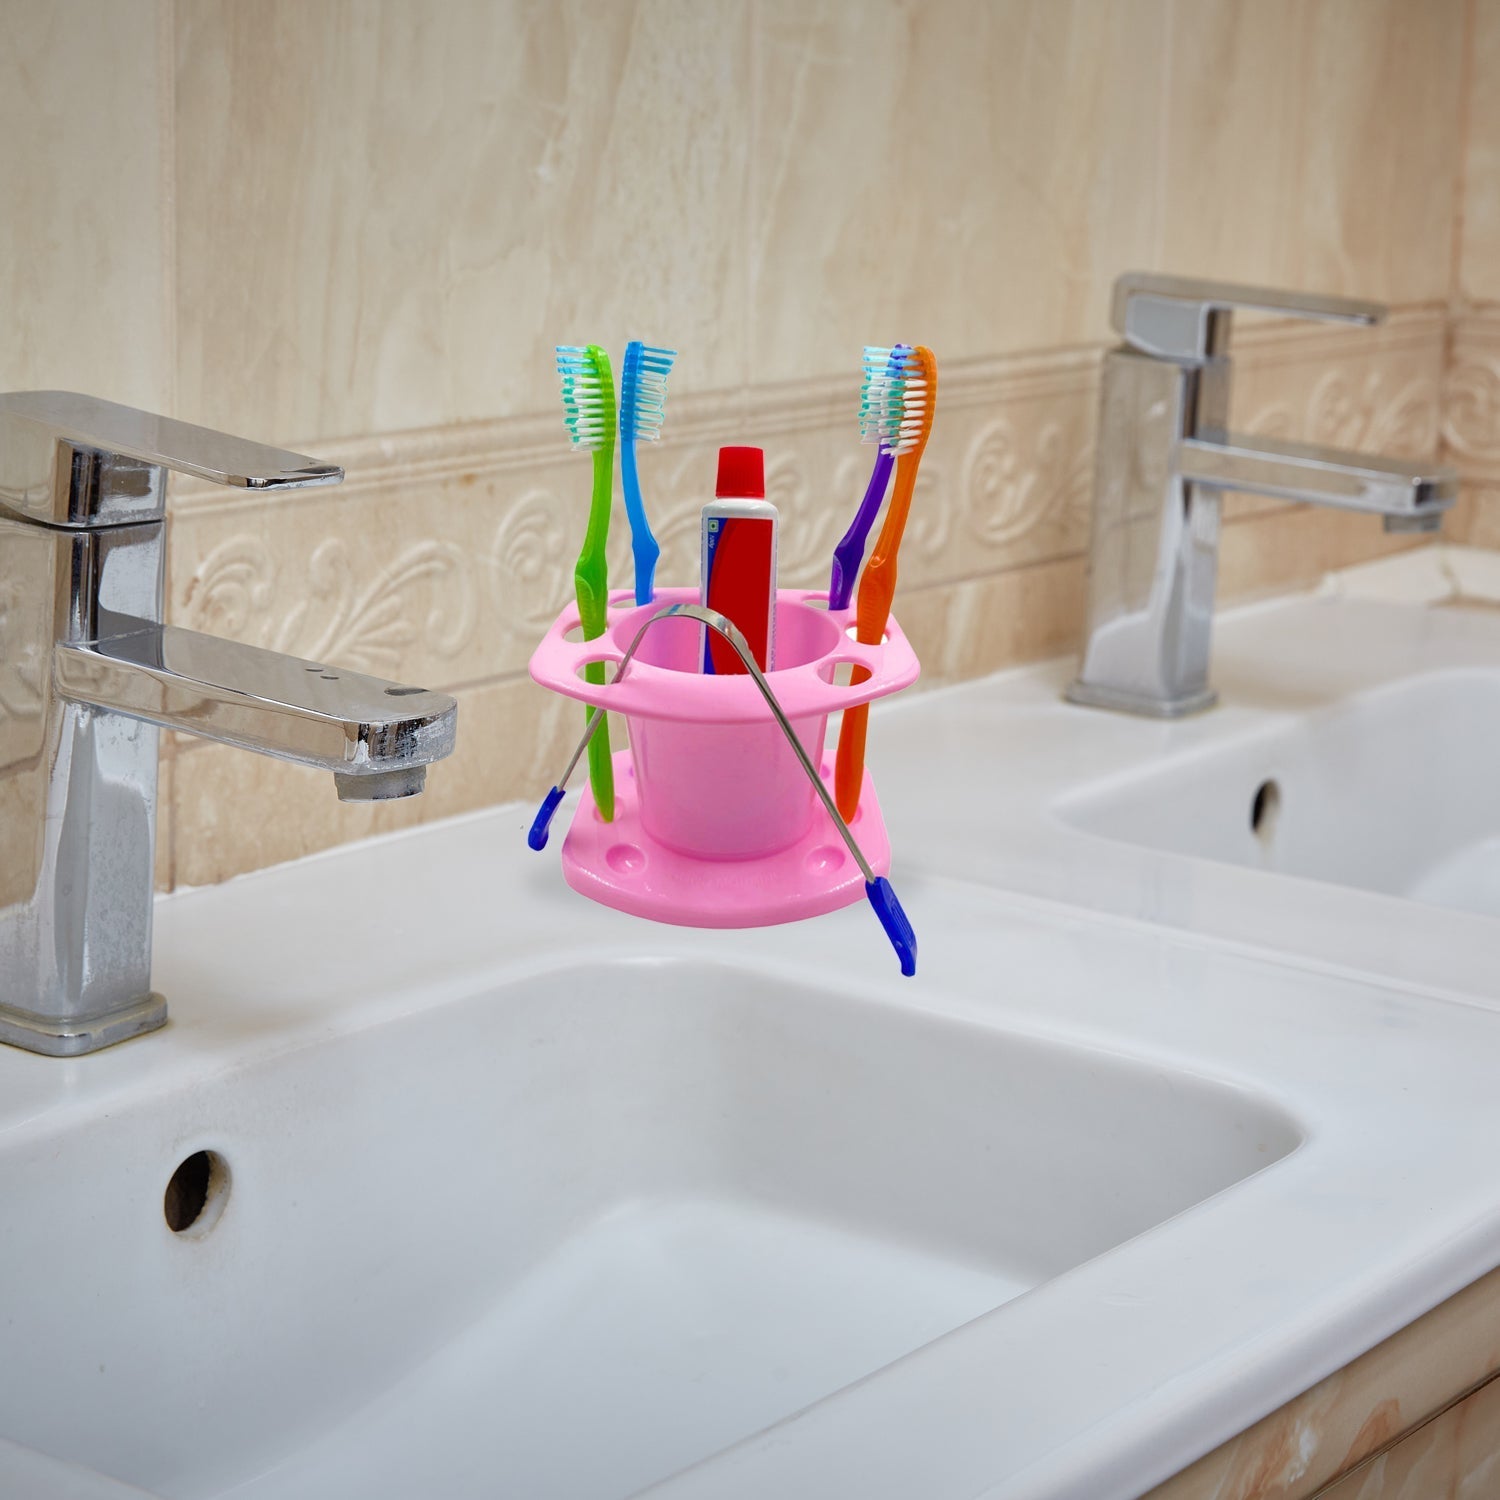 3689 Toothbrush Holder widely used in all types of bathroom places for holding and storing toothbrushes and toothpastes of all types of family members etc. 